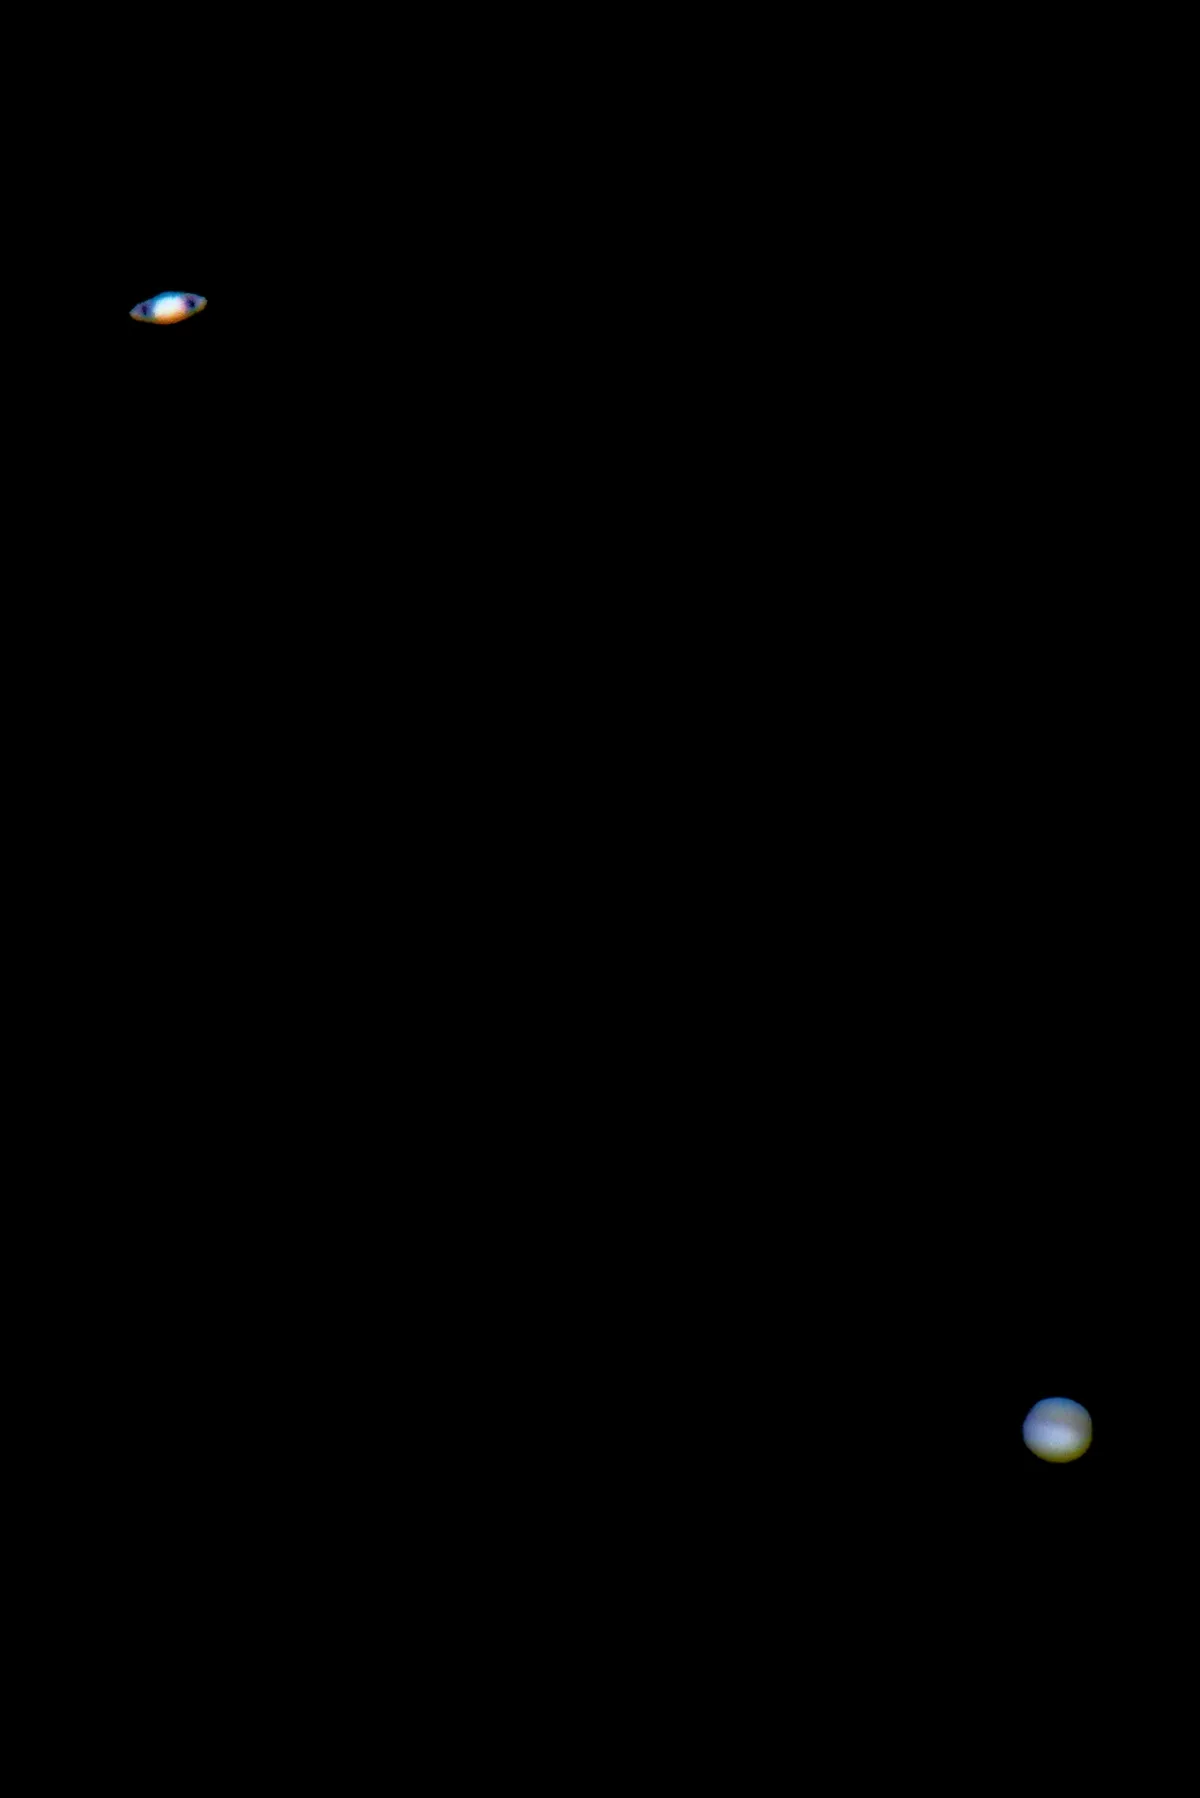 Great Conjunction image close up, 20 December 2020